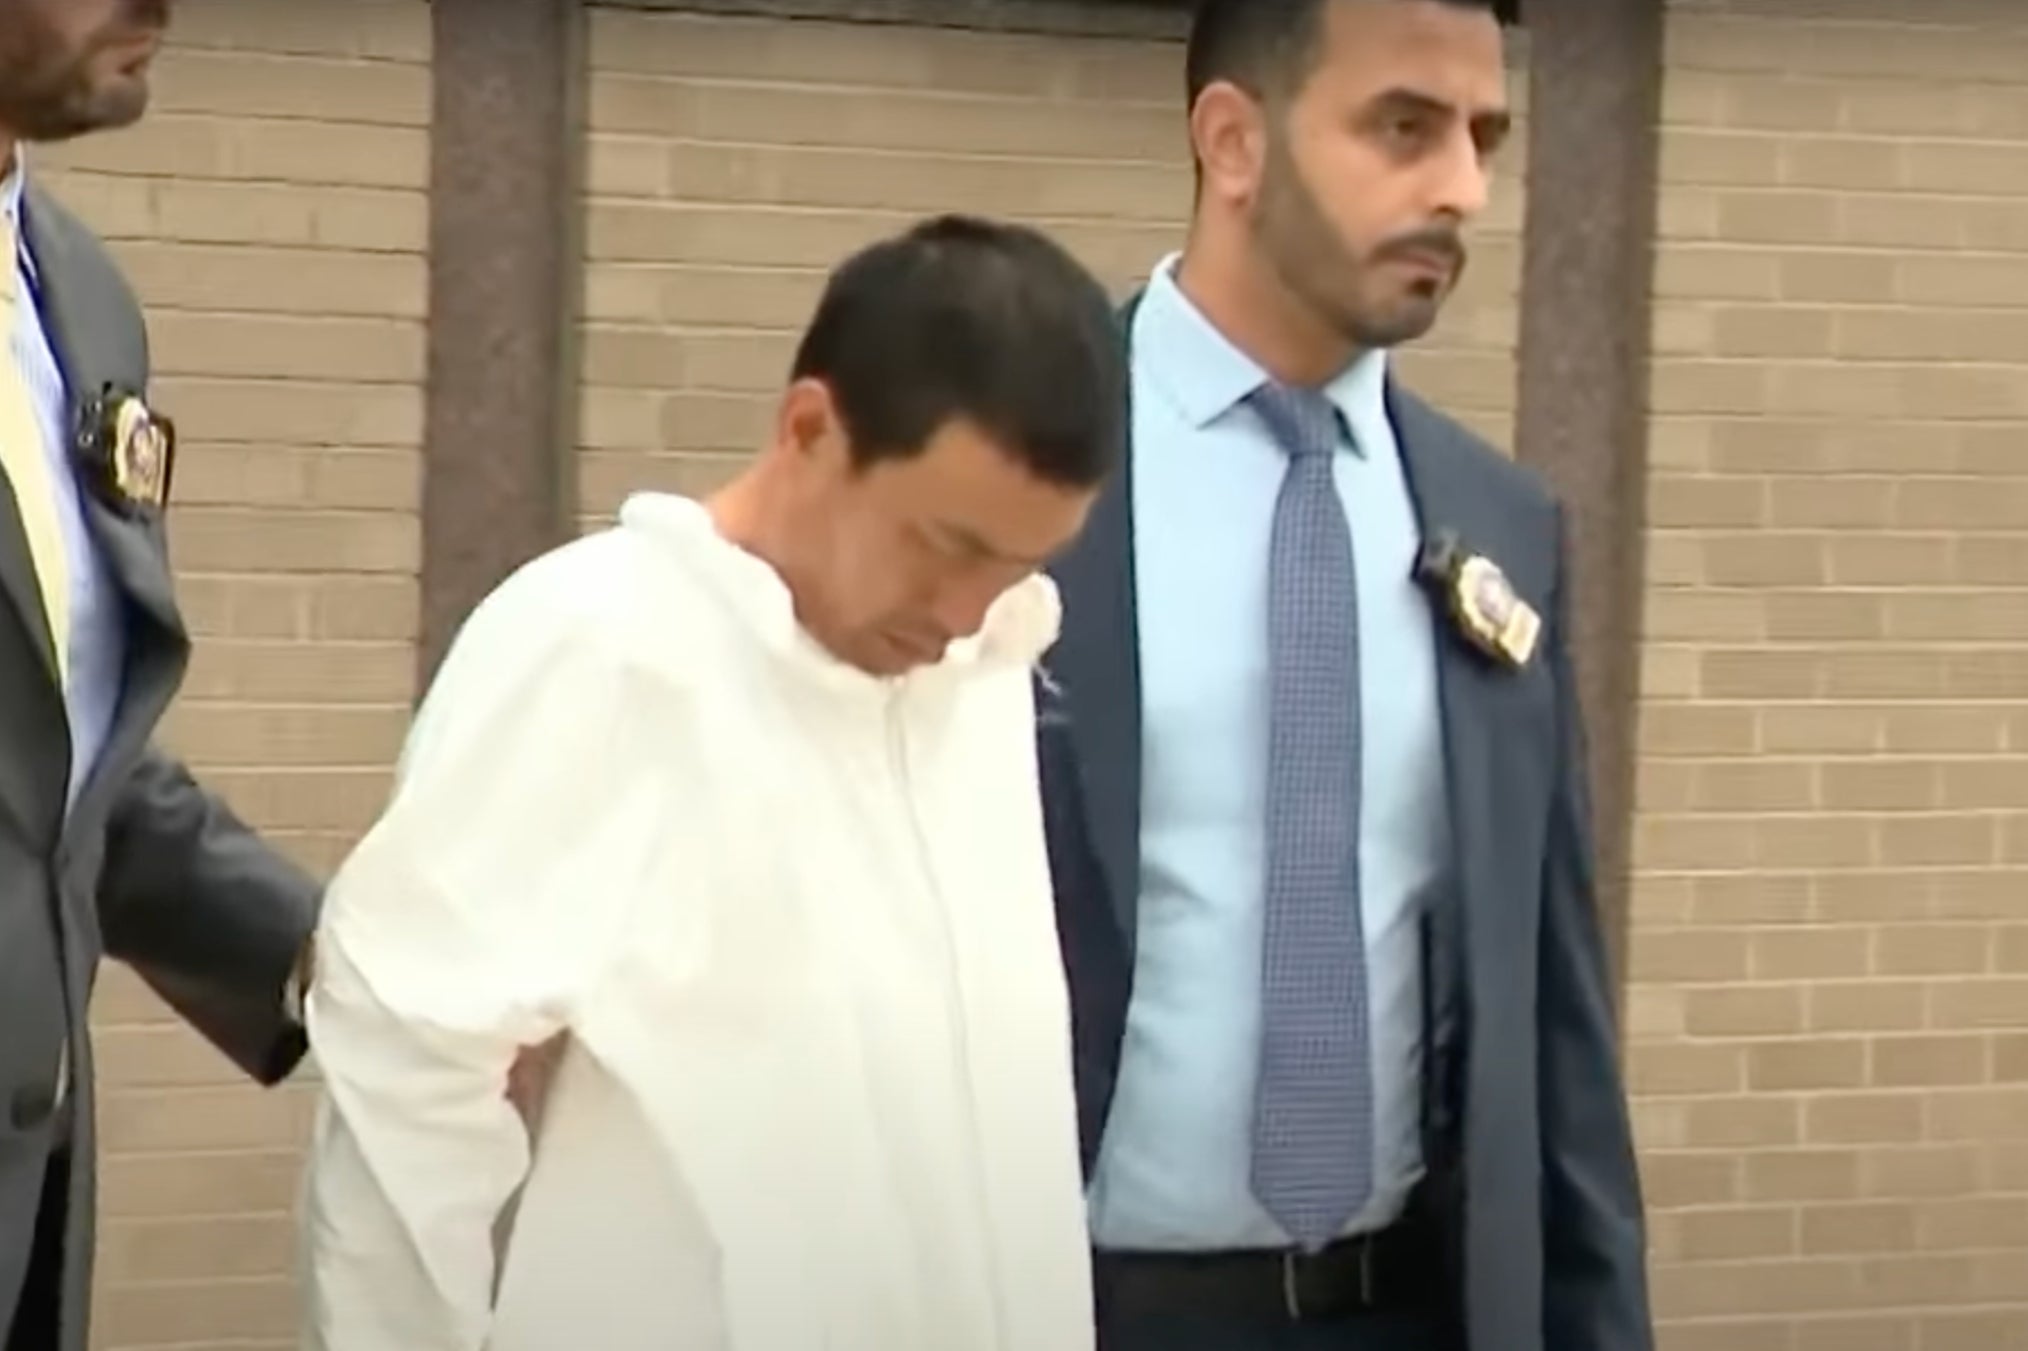 Liyong Ye has been charged with murder in a hammer attack in Queens that killed a woman and critically injured her two children